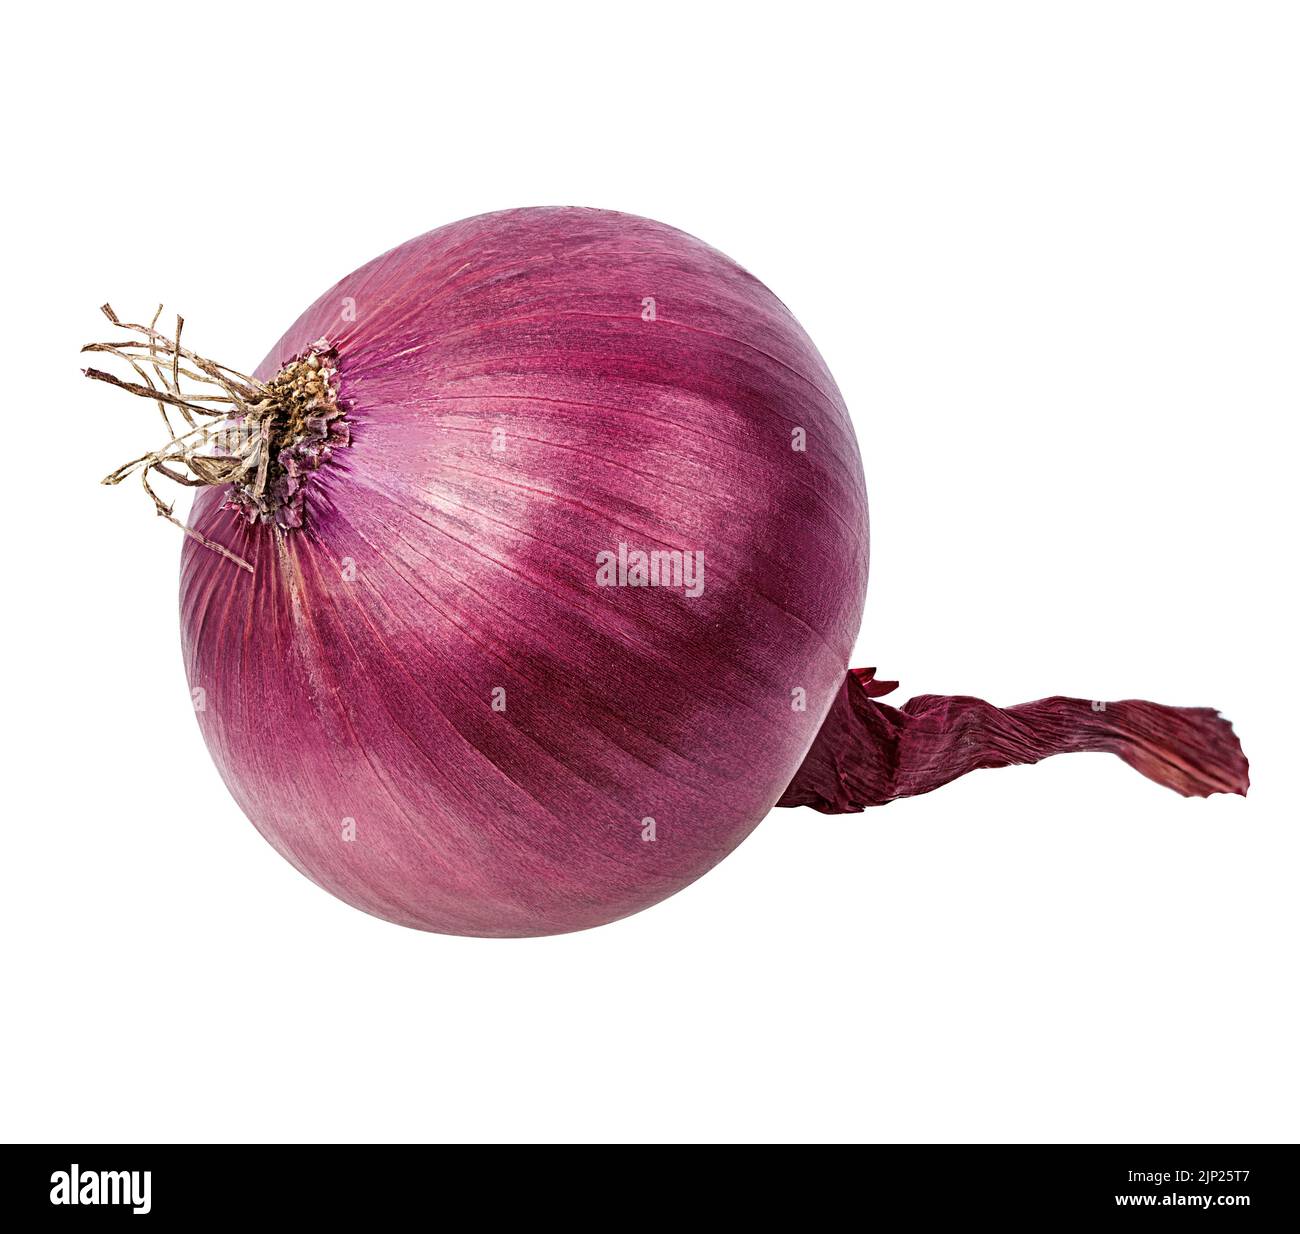 Onions isolated on a white background Stock Photo